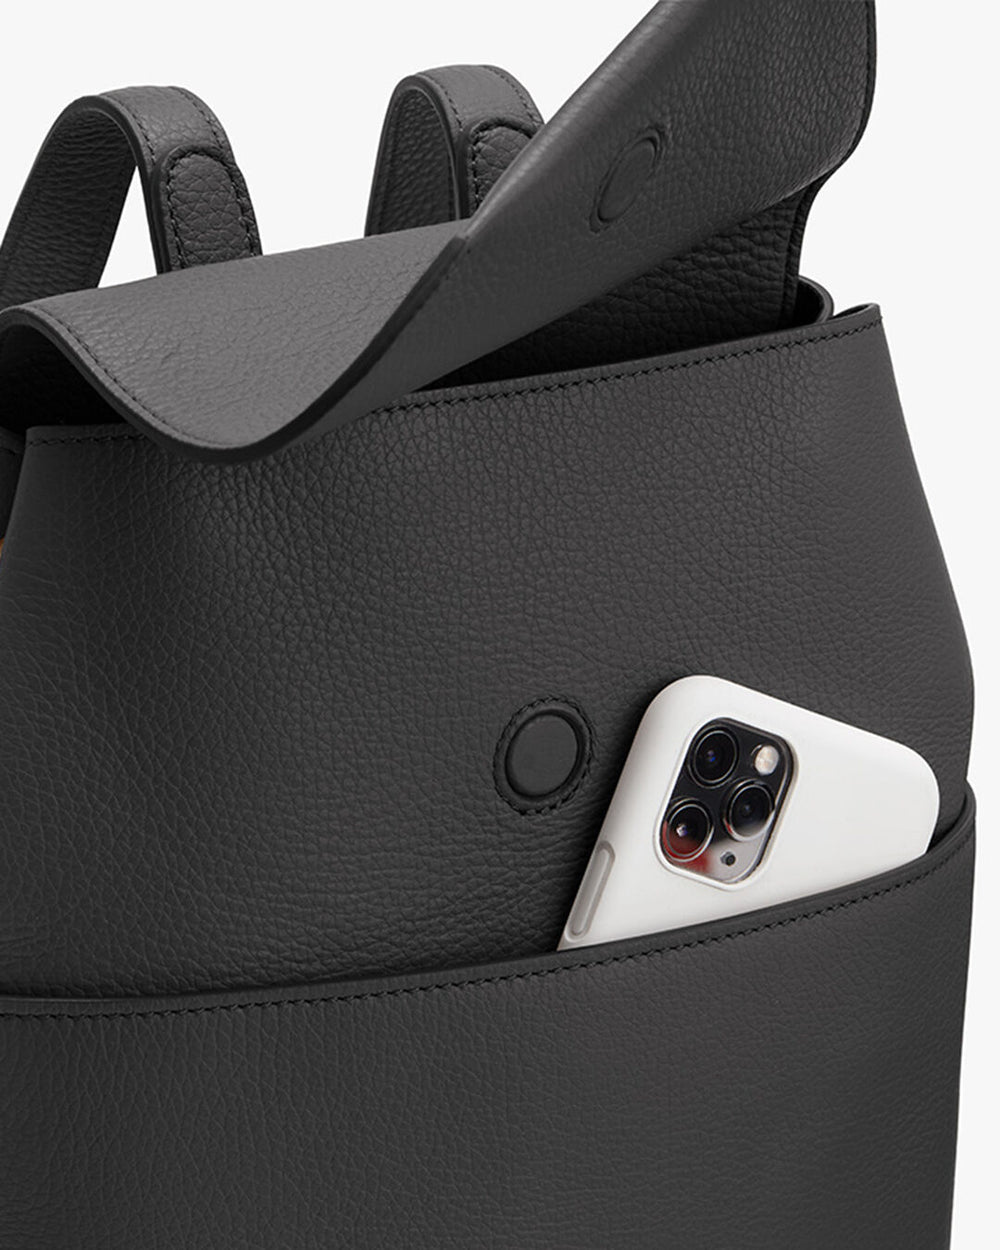 Smartphone in an open backpack